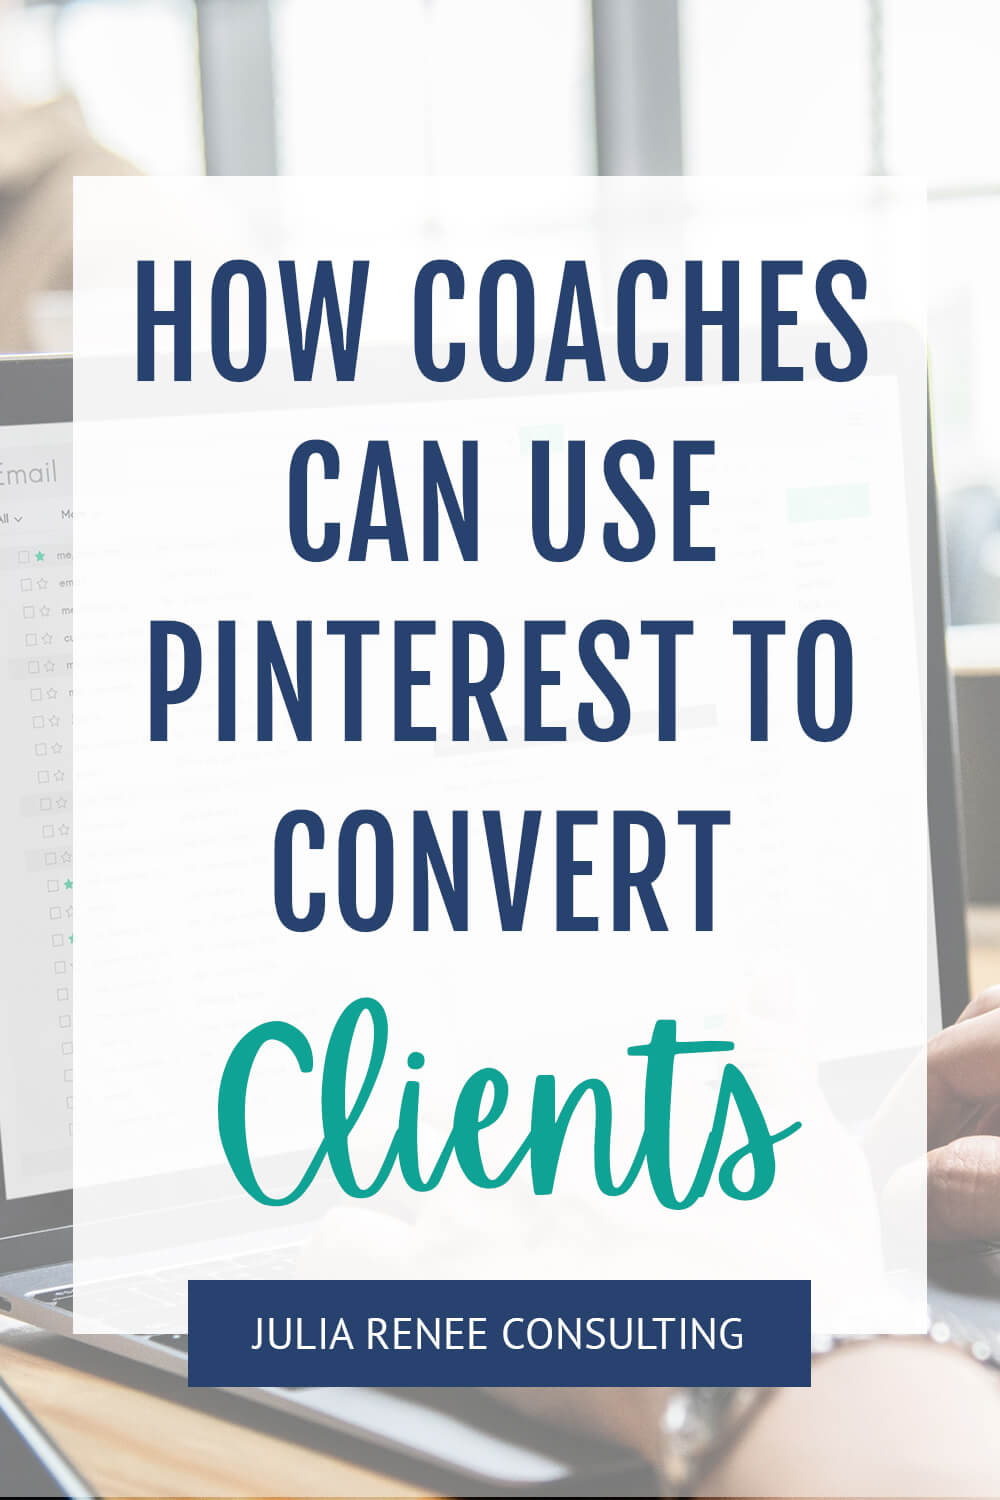 How Coaches Can Use Pinterest to Convert Clients